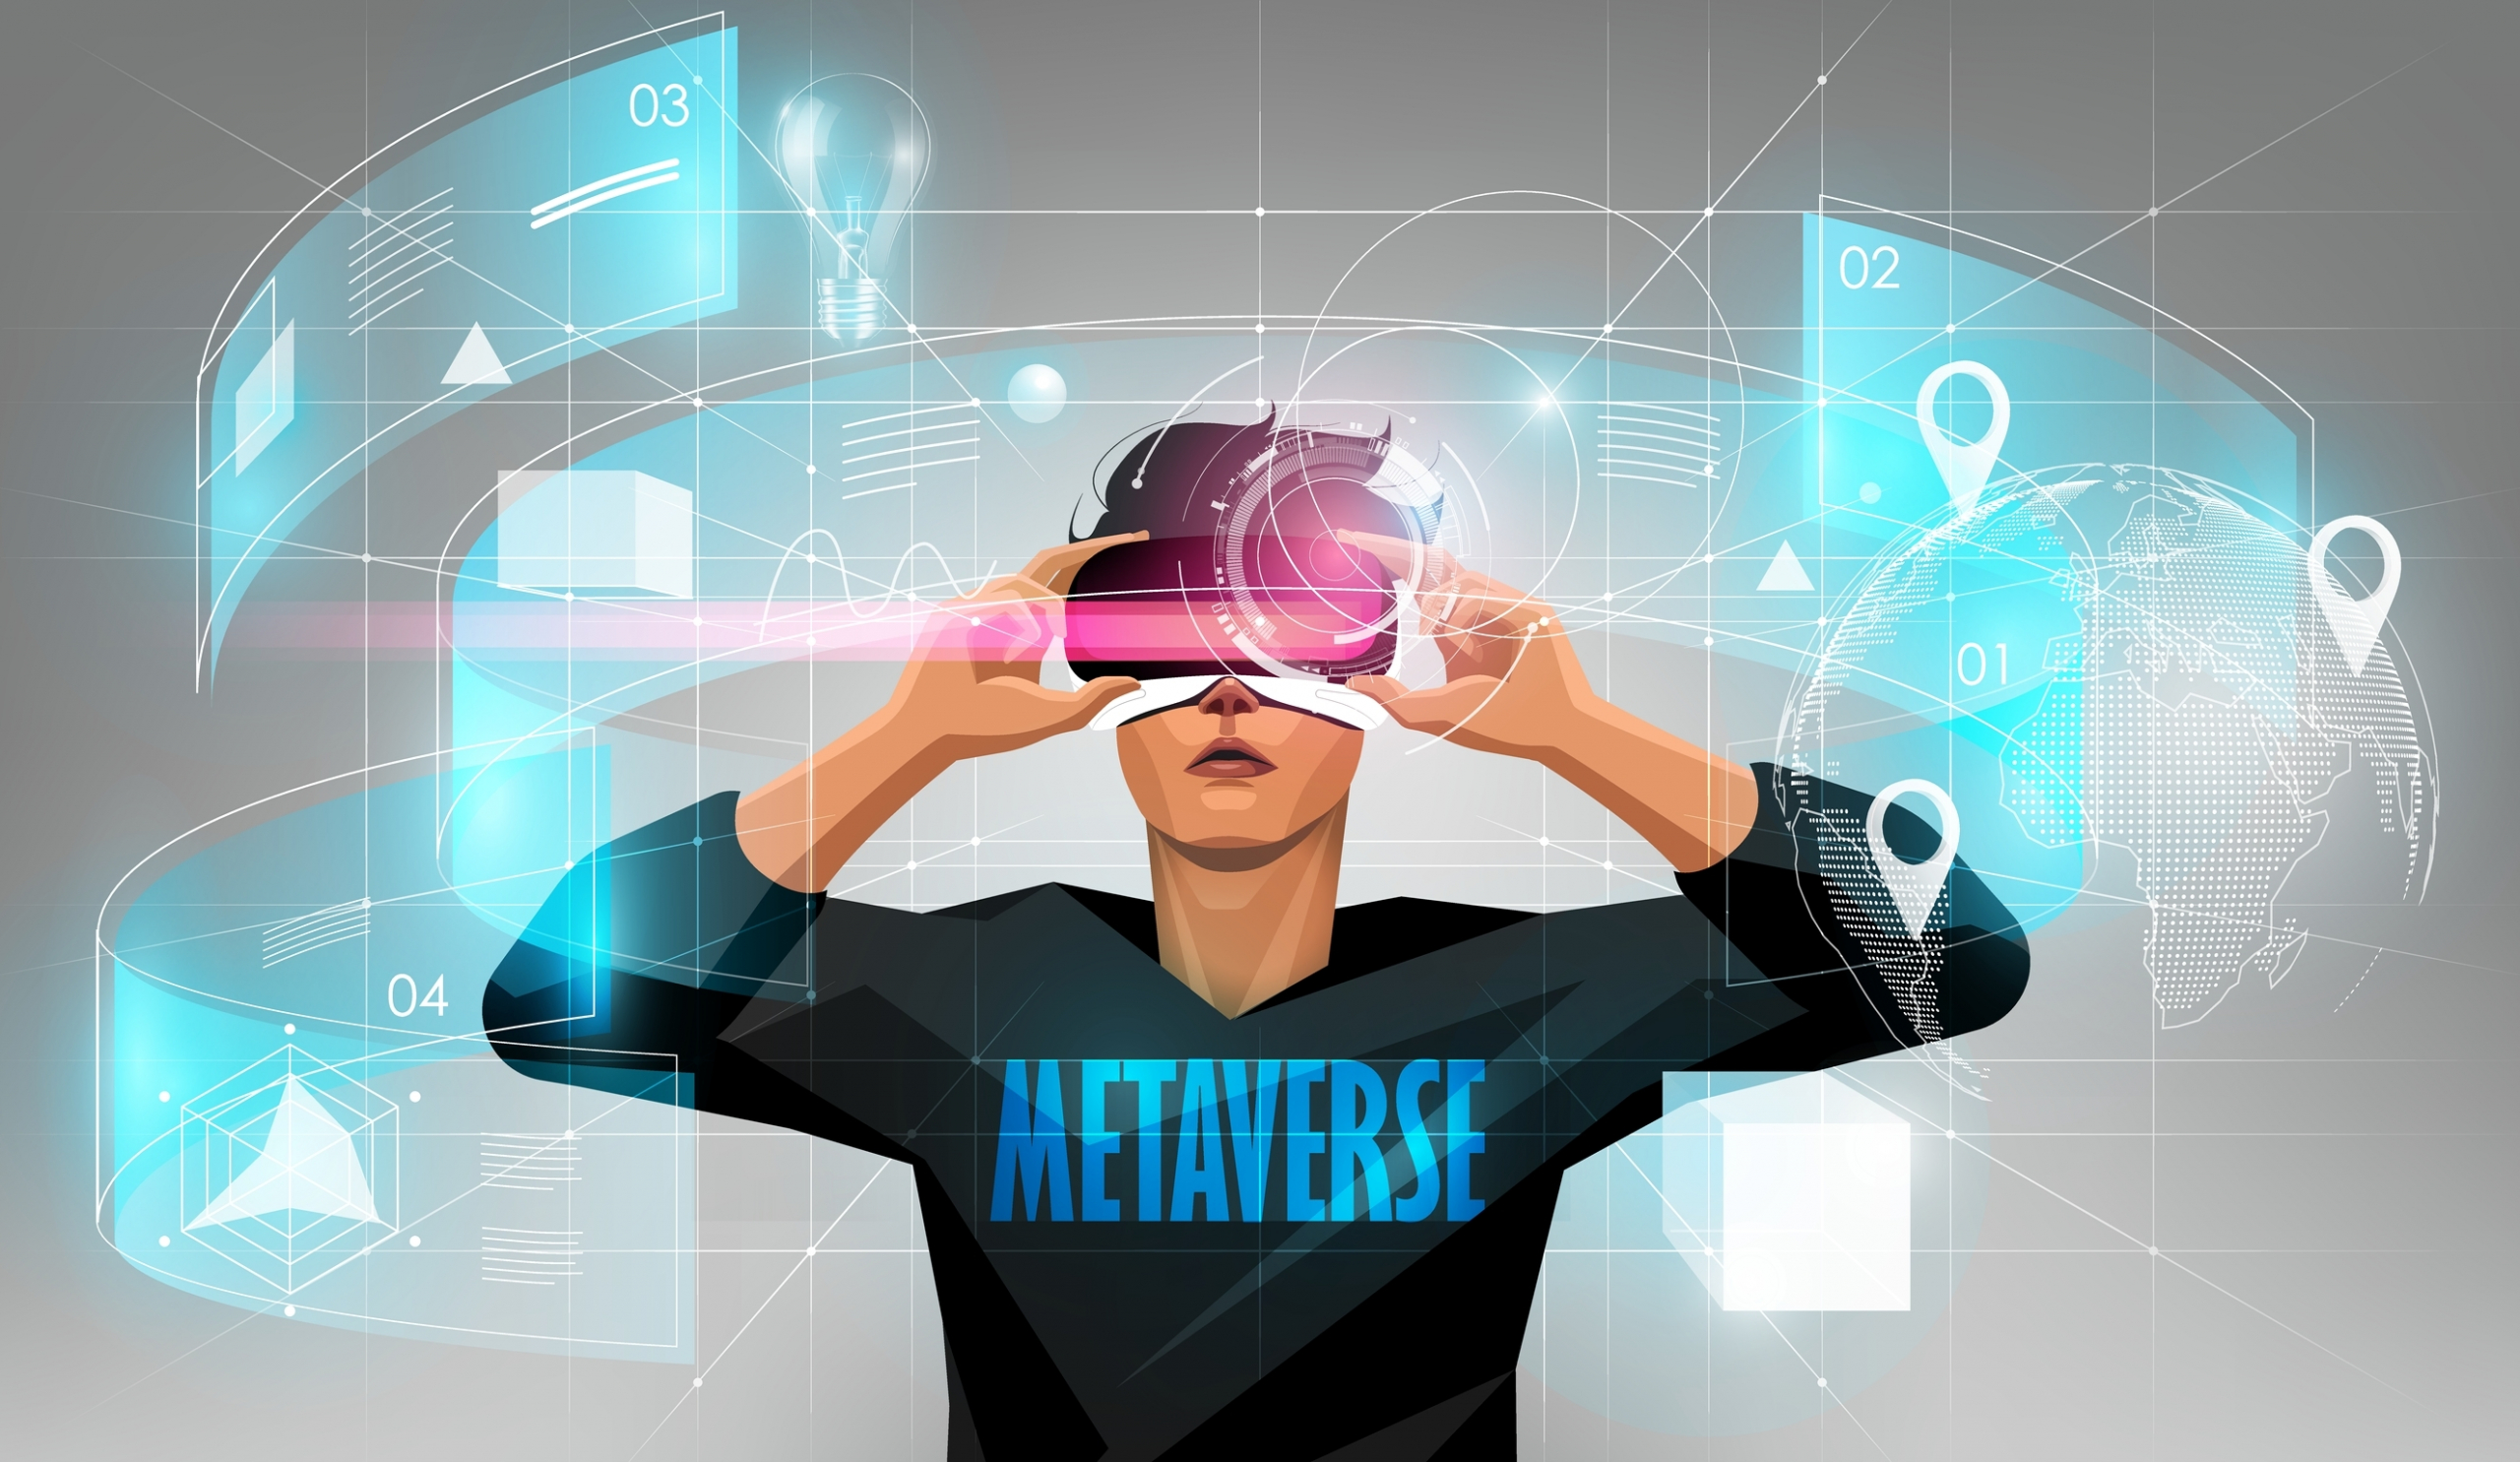 Metaverse Can Build Access for Big Companies, Says Virtual Brand Group CEO